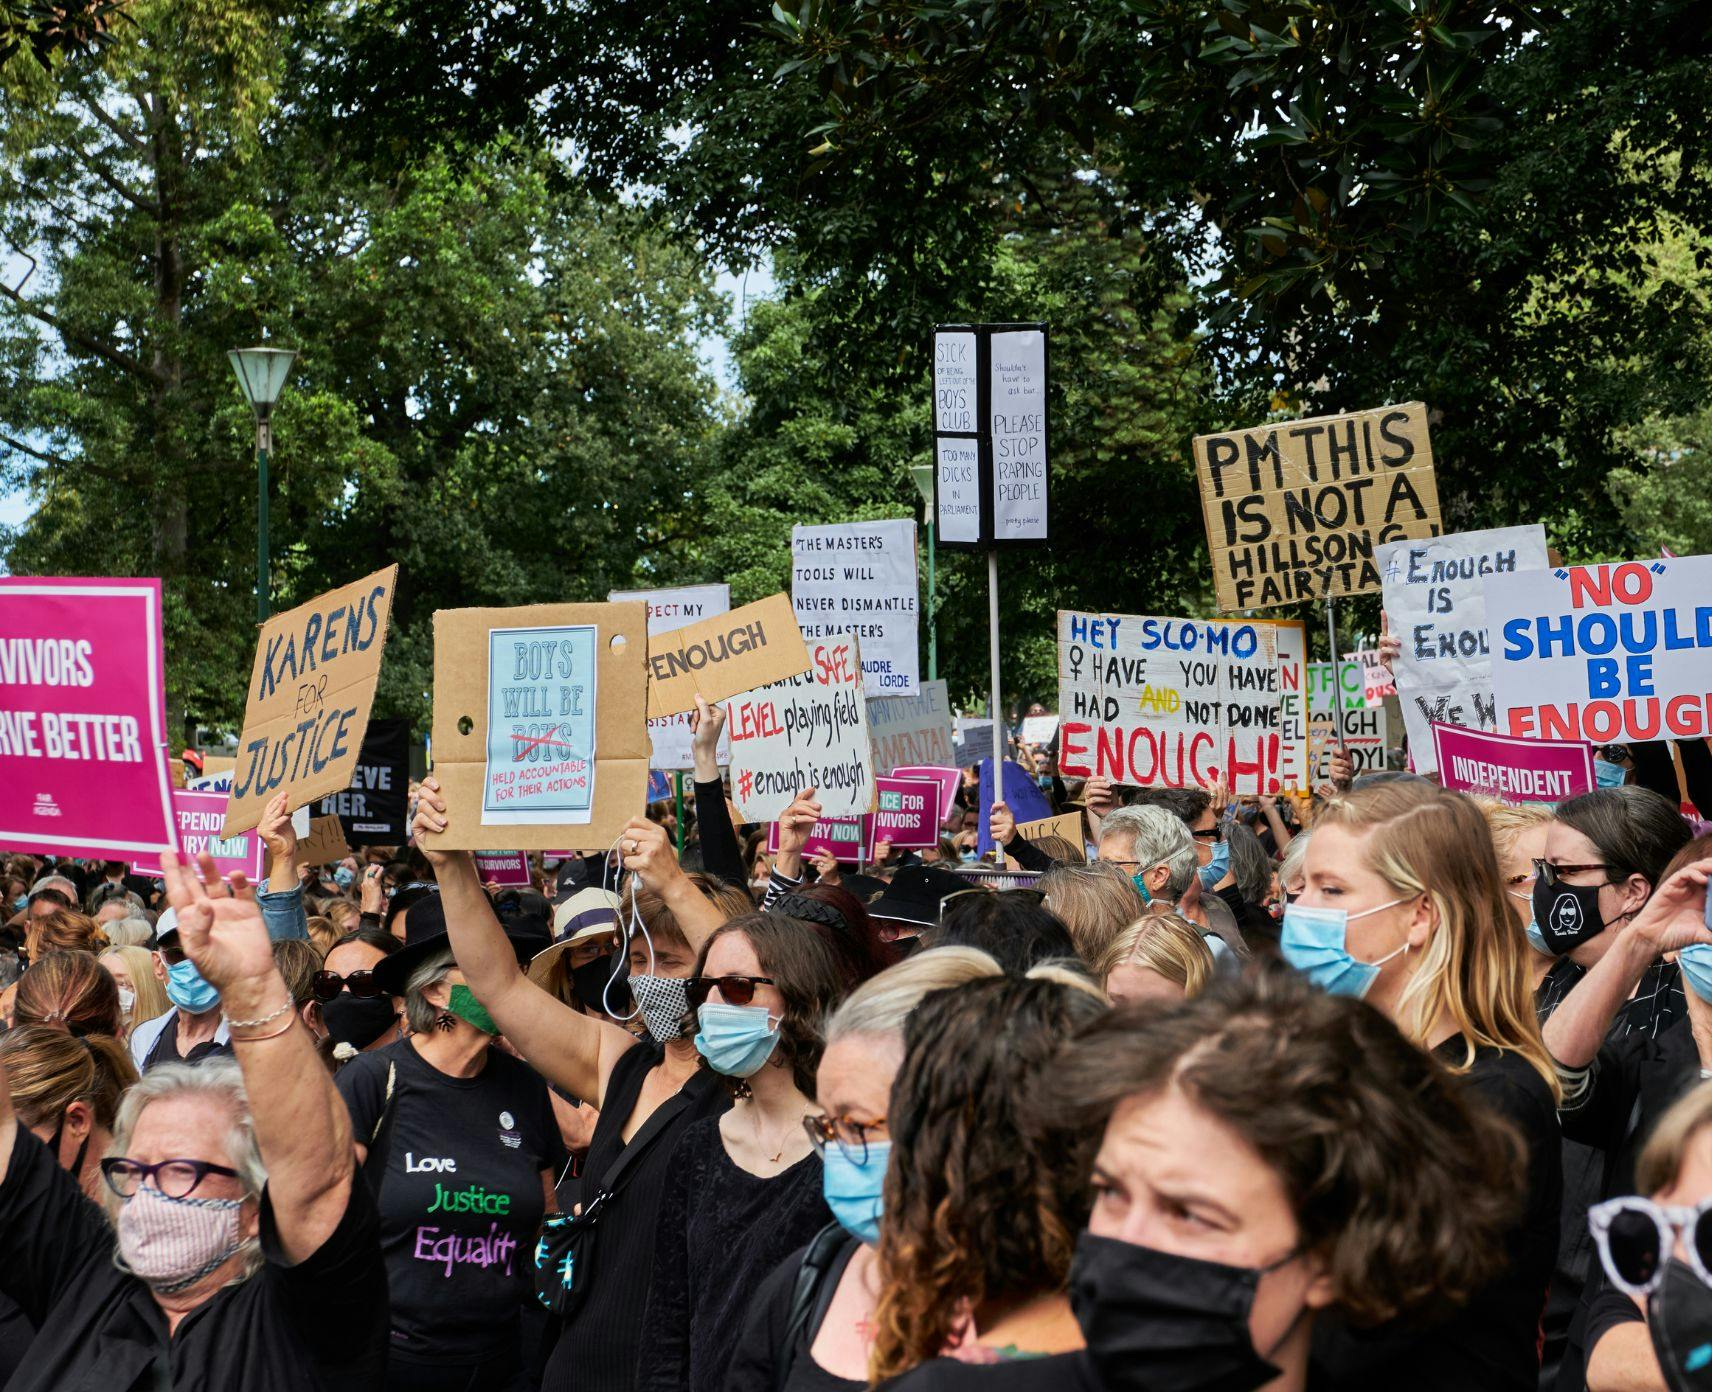 A crowd of female protesters wearing masks and holding placards at a protest in Melbourne. Everyone looks focused and determined.